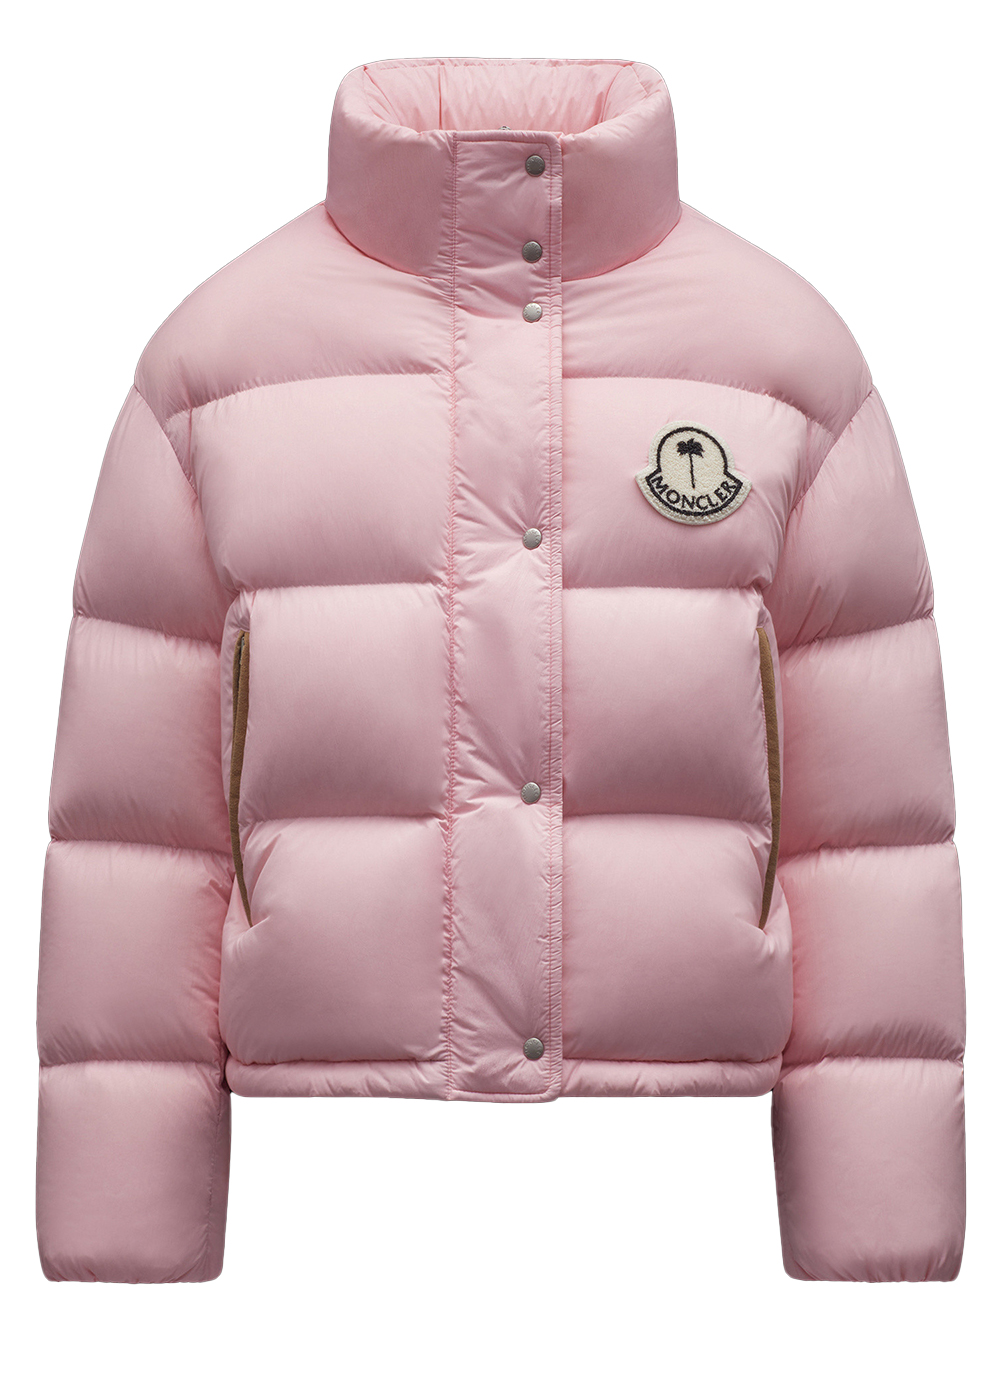 Buy Moncler Jackets, Coats, Hoodies and More